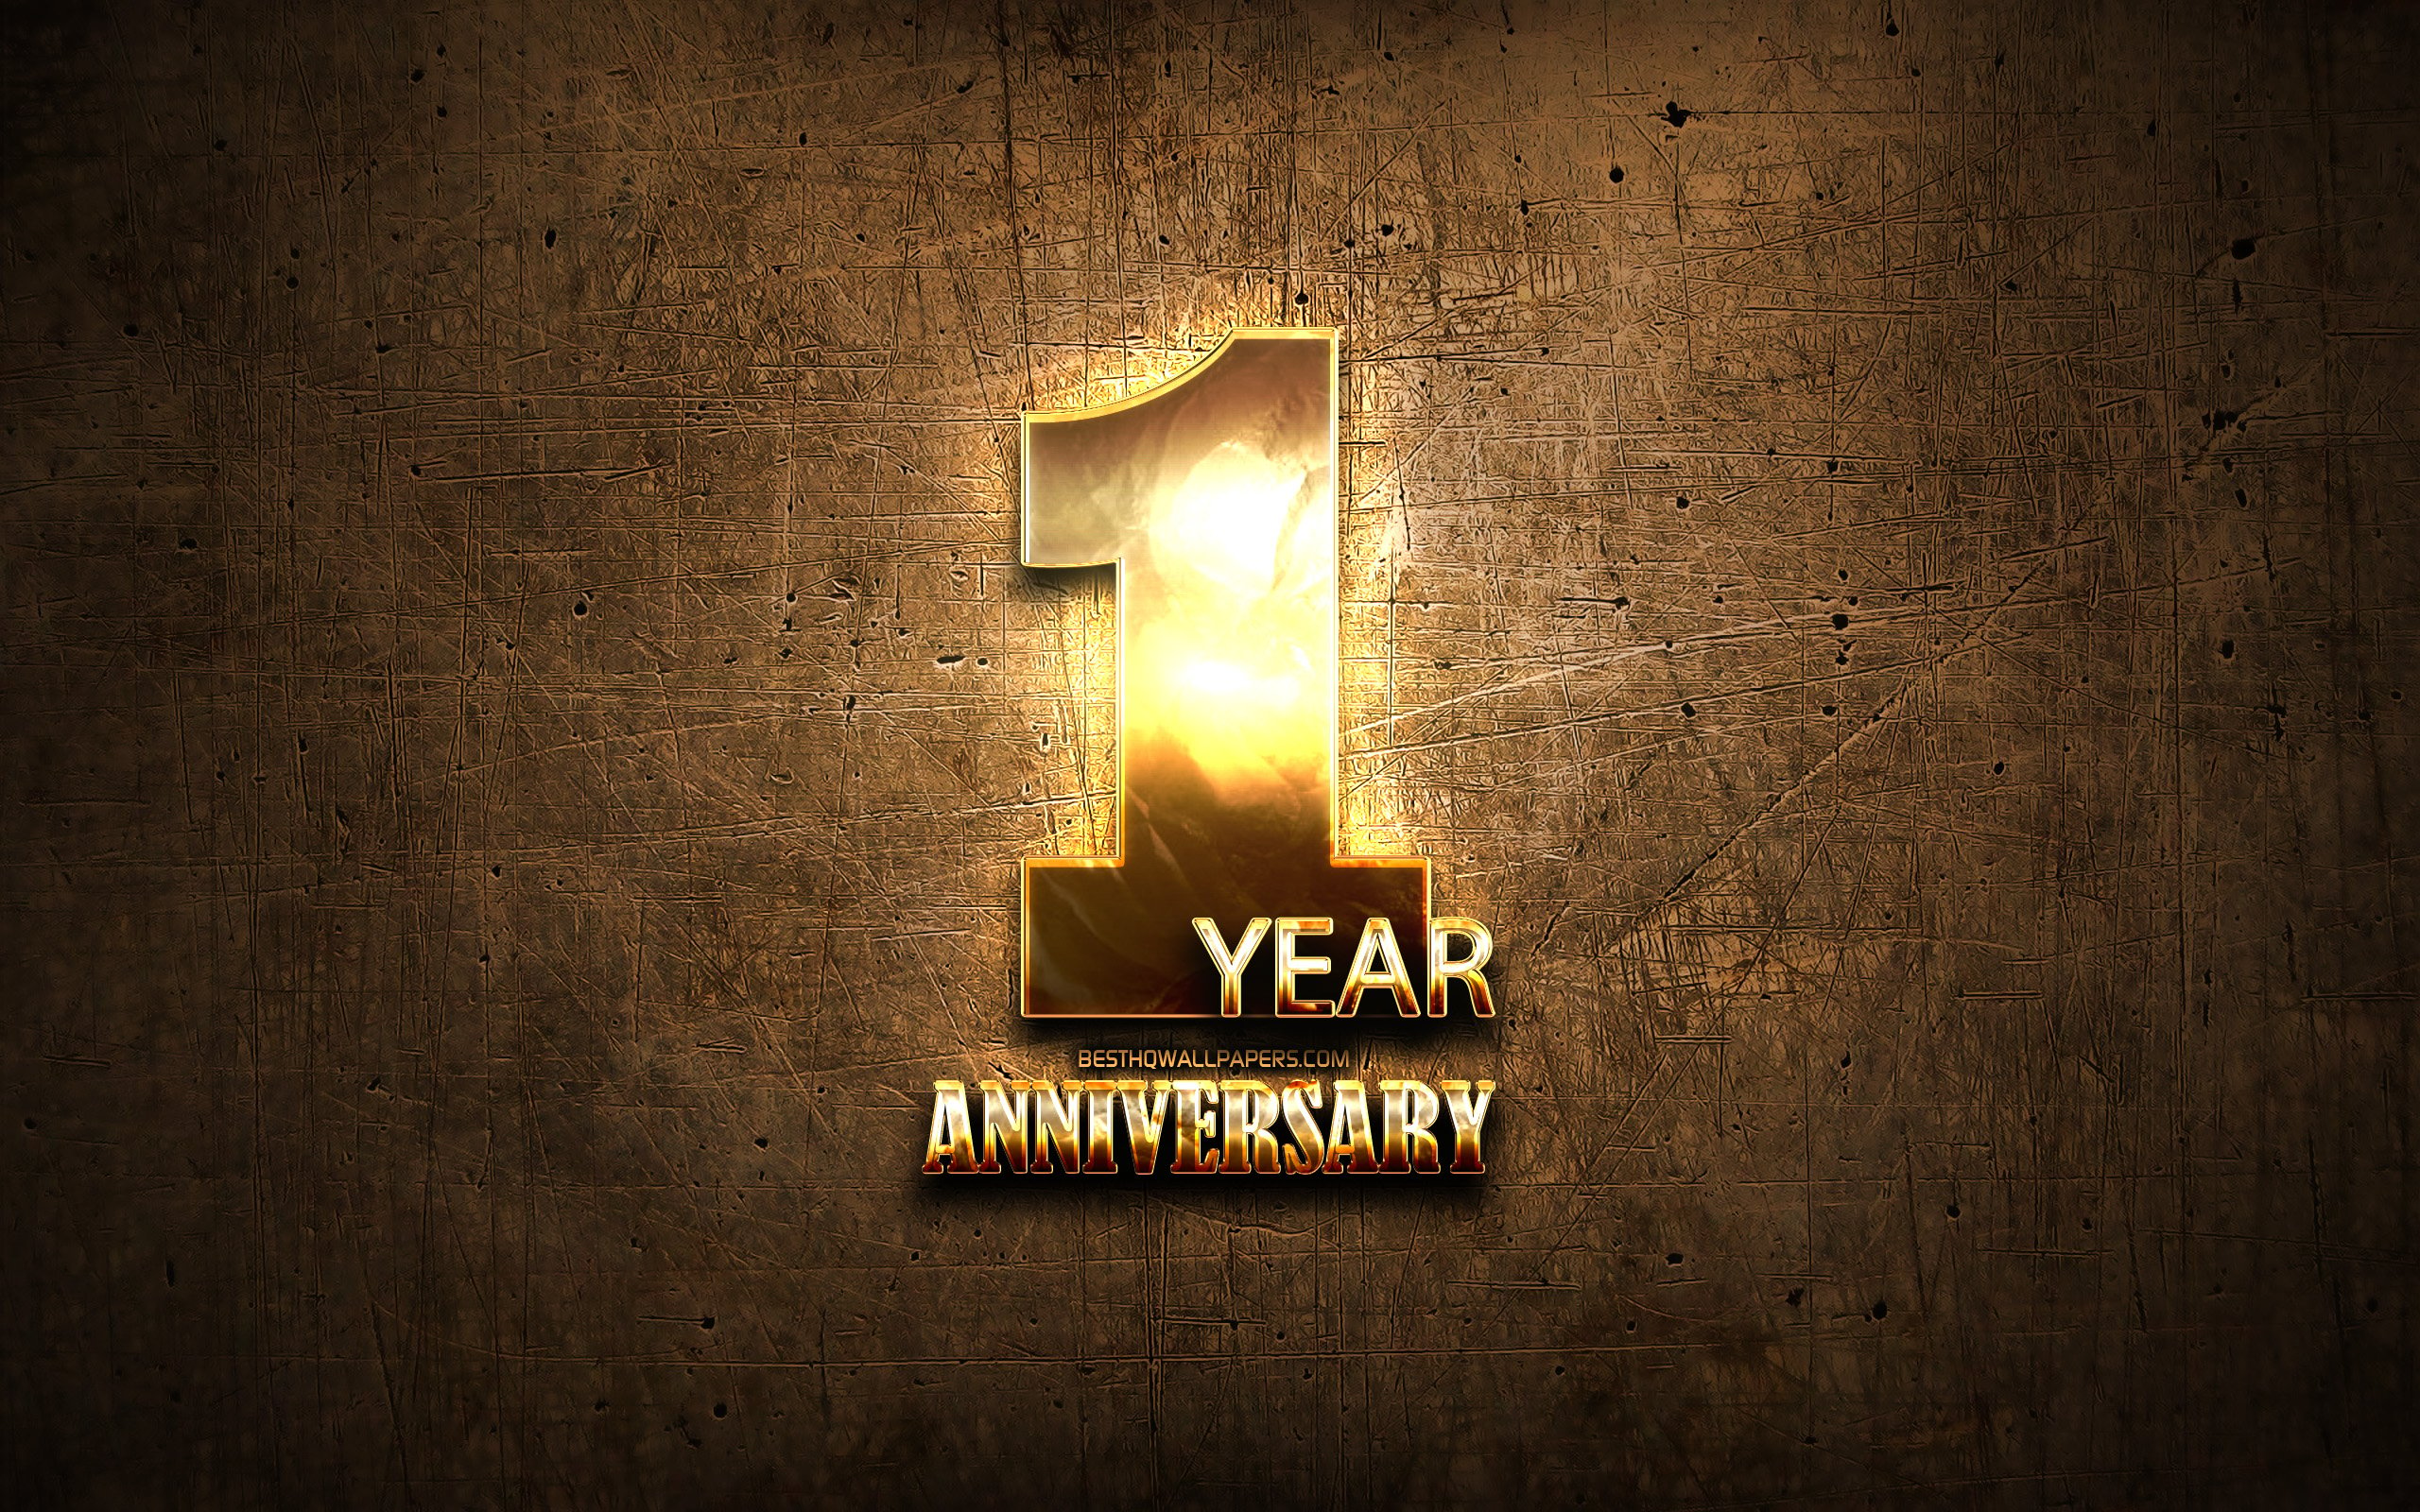 Download wallpaper 1 Year Anniversary, golden signs, anniversary concepts, brown metal background, 1st anniversary, creative, Golden 1st anniversary sign for desktop with resolution 2560x1600. High Quality HD picture wallpaper